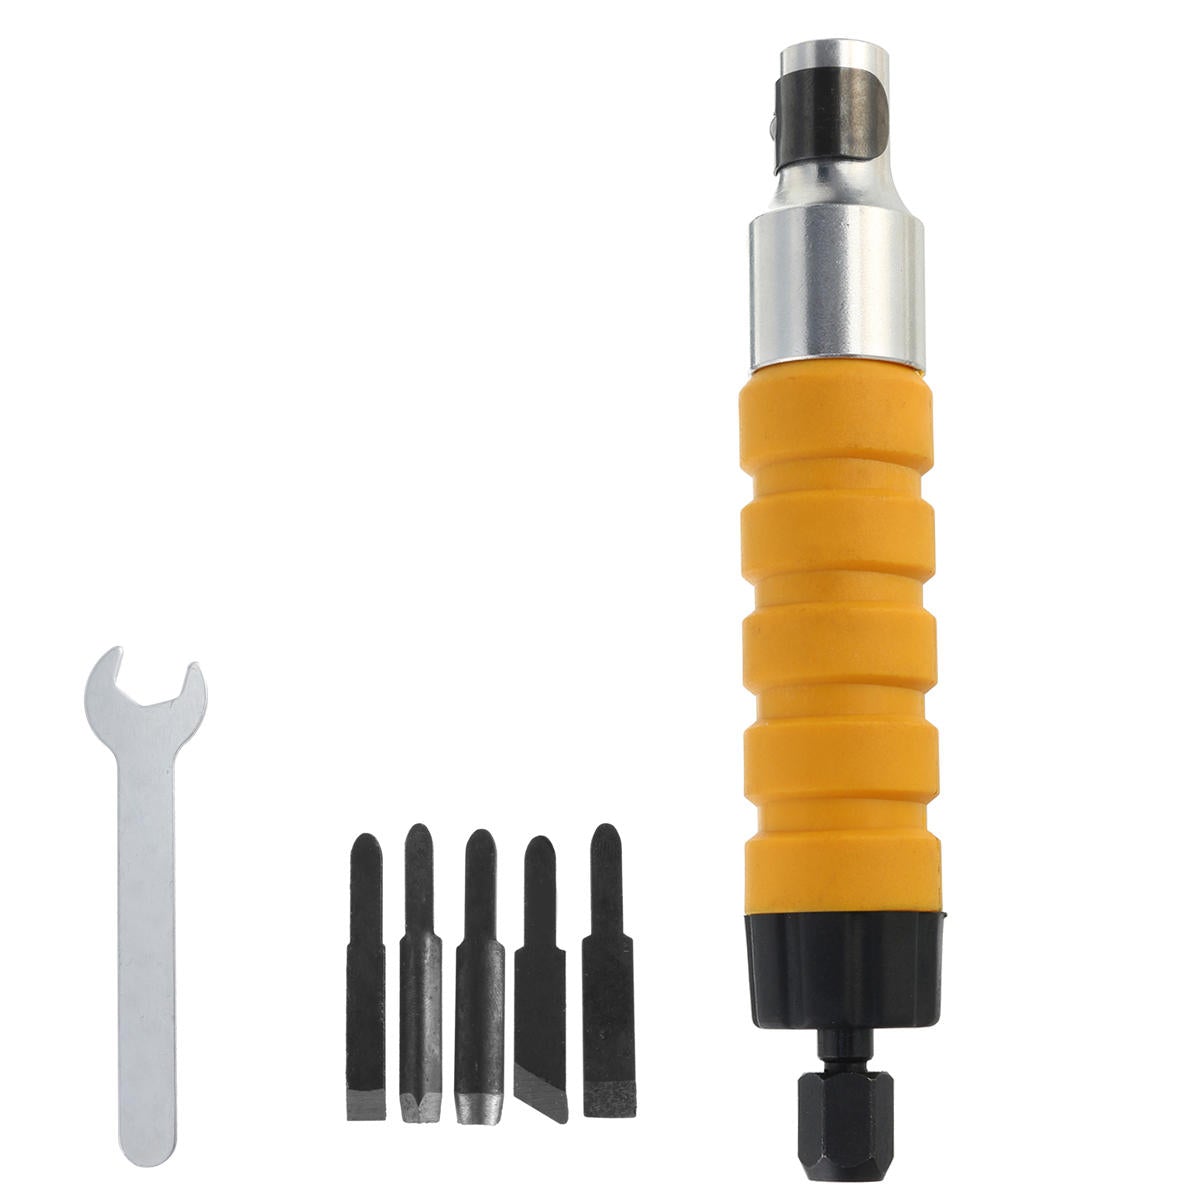 Electric wood working Carving Chisel Wood Carving Tool Set With 5 Cutter Head And Flexible Shaft For Electric Drill Electric Grinder